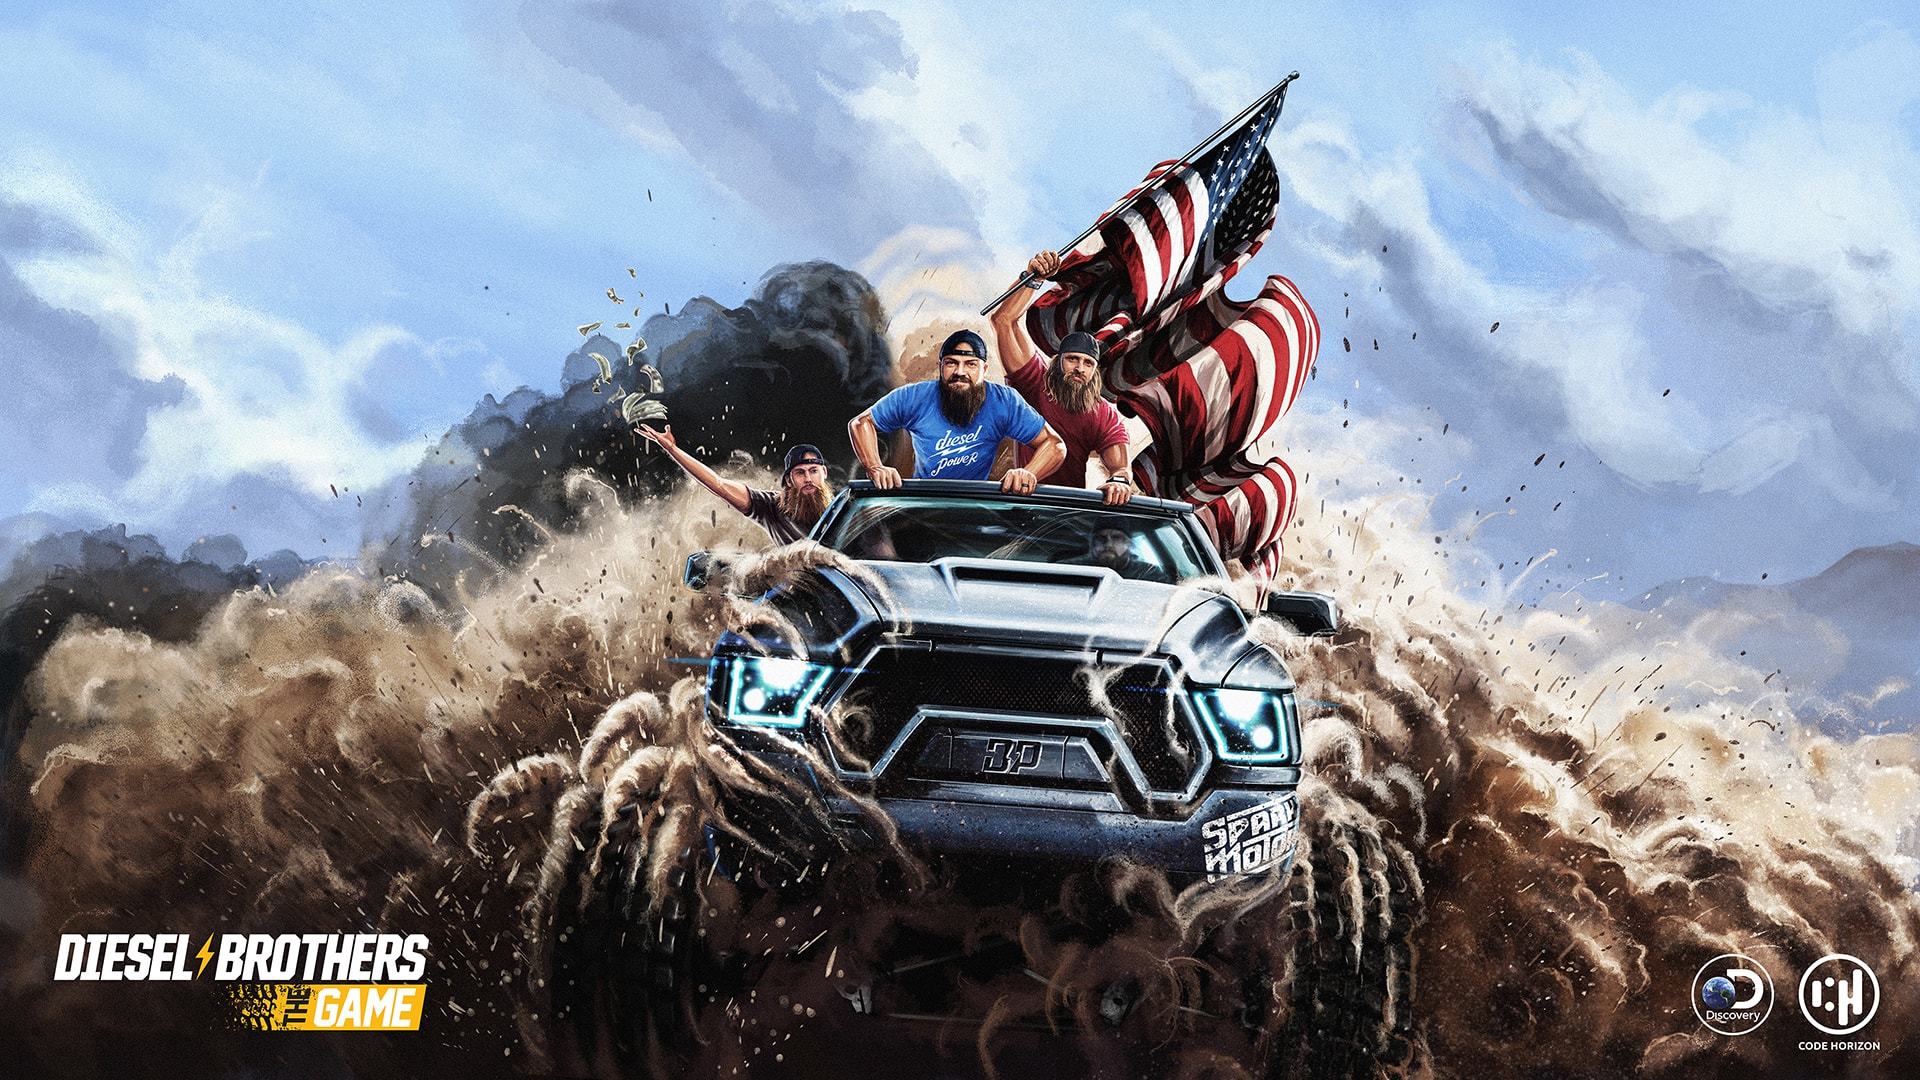 Steam Gold Rush The Game Diesel Brothers The Game Announced